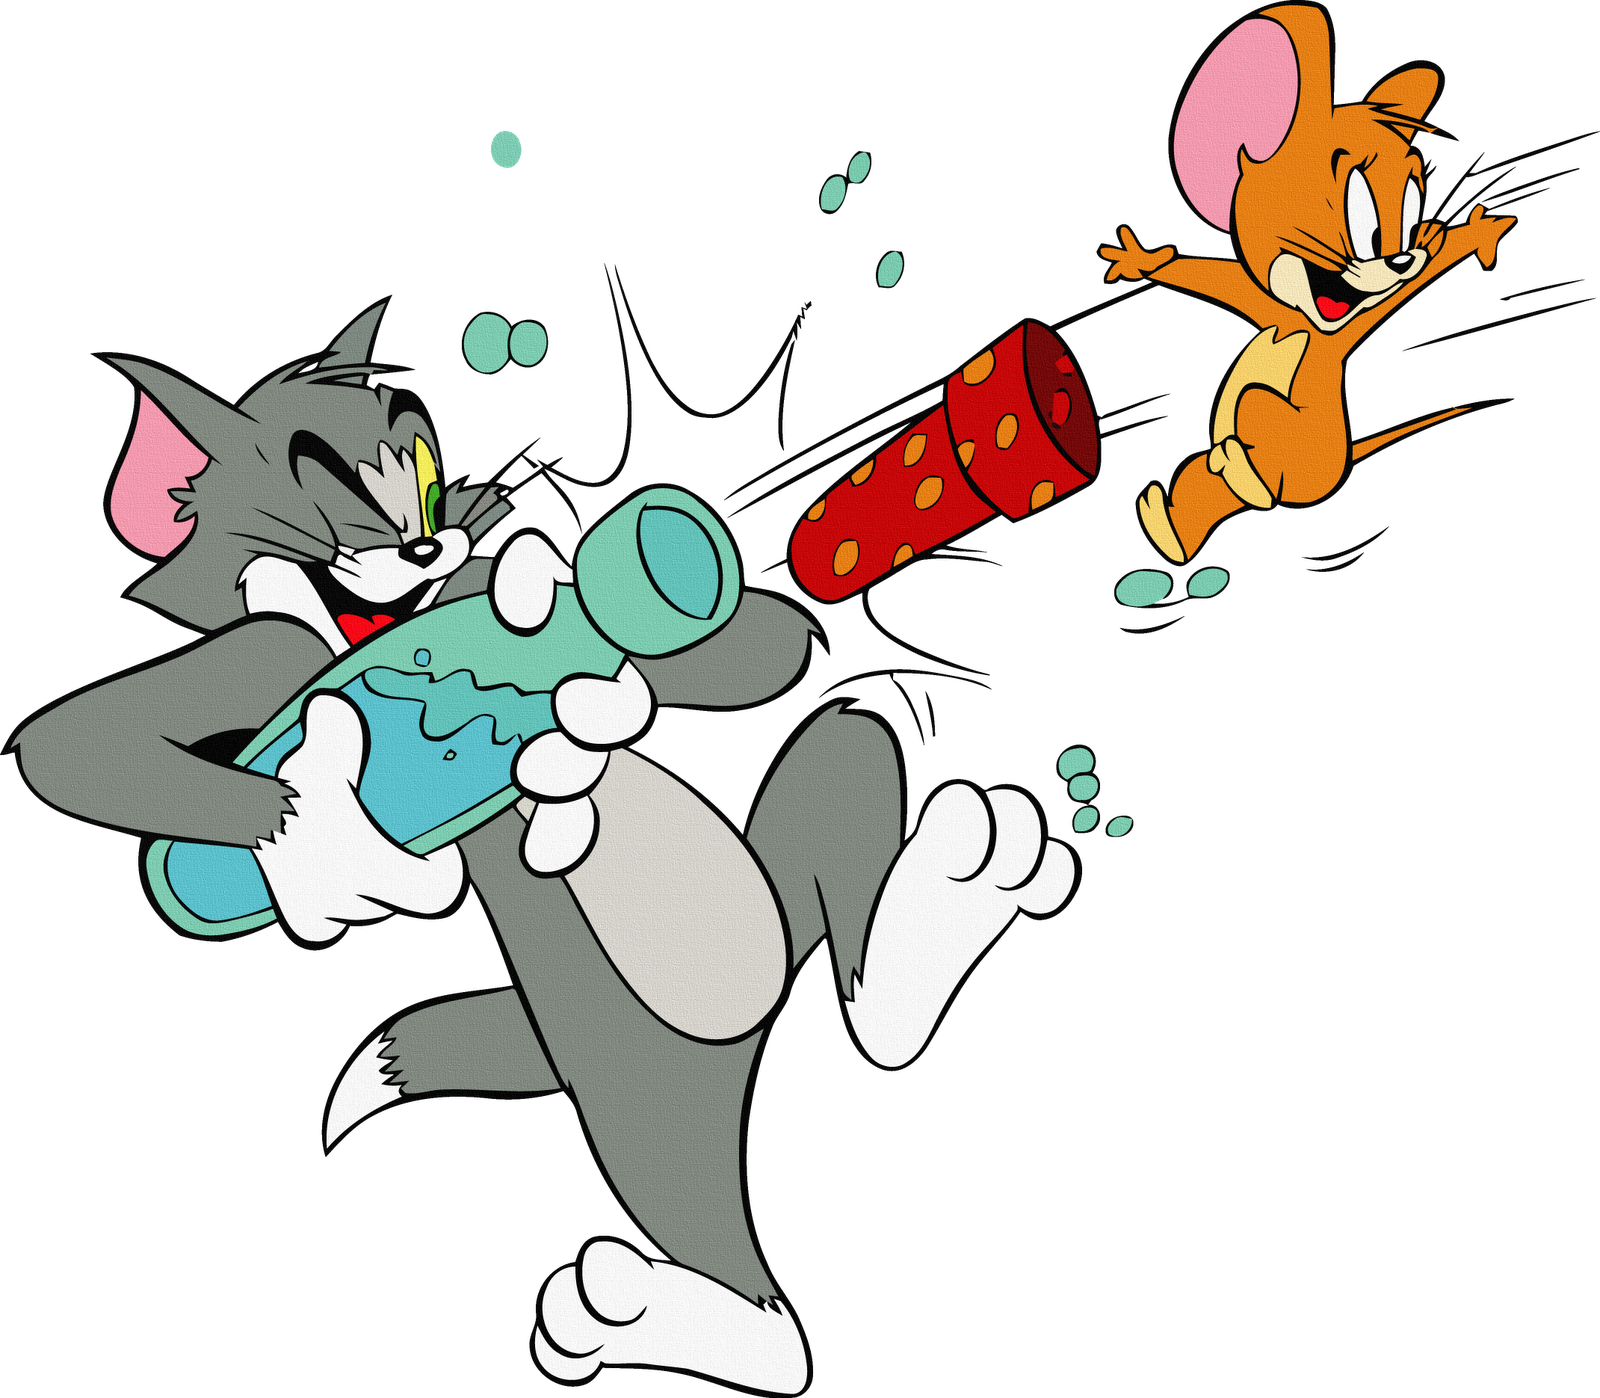 tom and jerry videos torrent